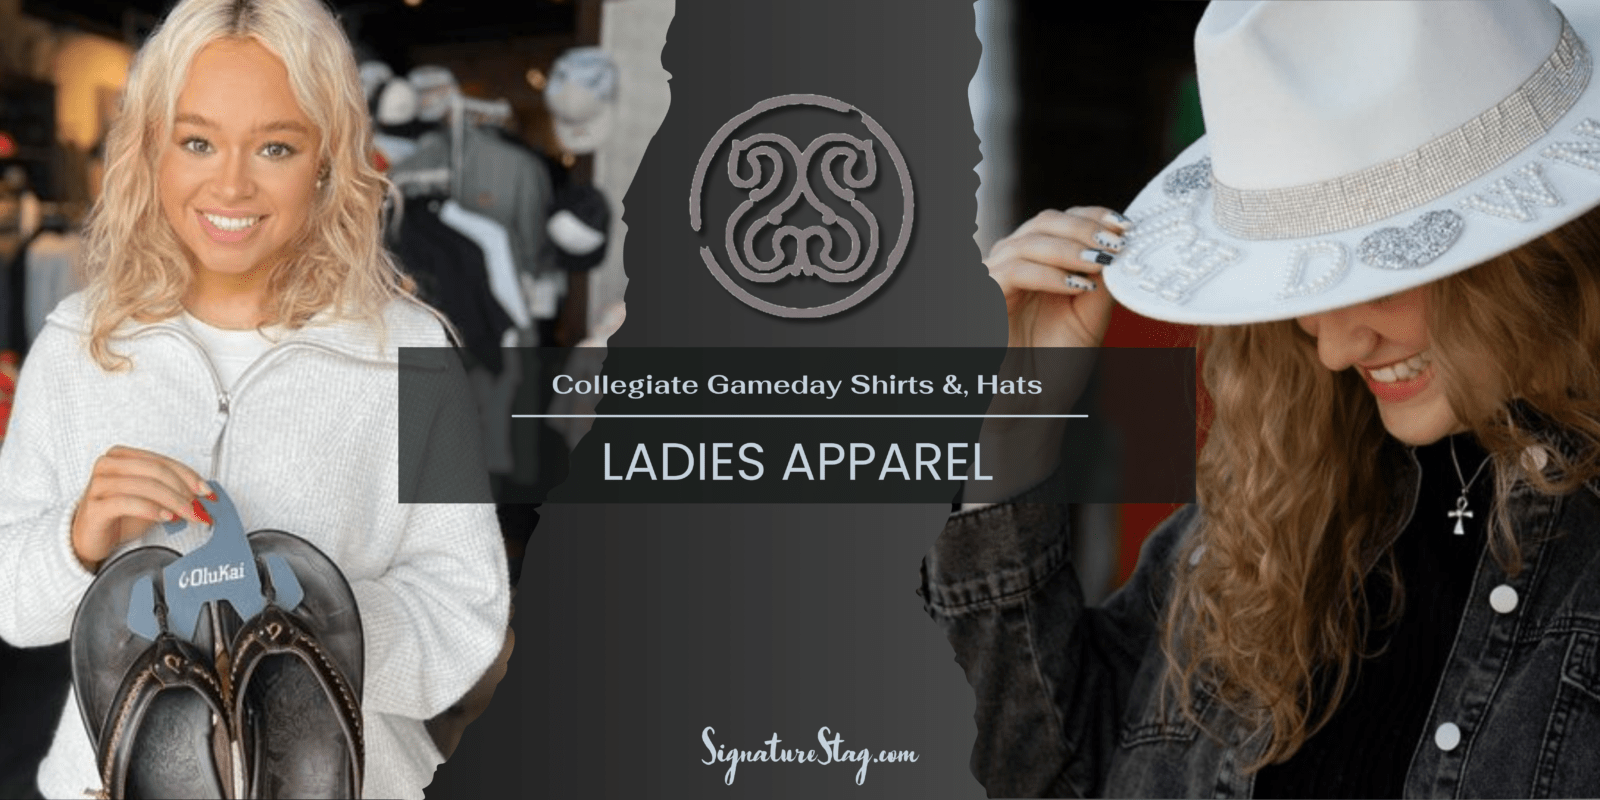 Ladies Apparel with Collegiate Shirts, Hats, Shoes in Lubbock TX and Midland TX. Signature Stag Premium Clothing for women.